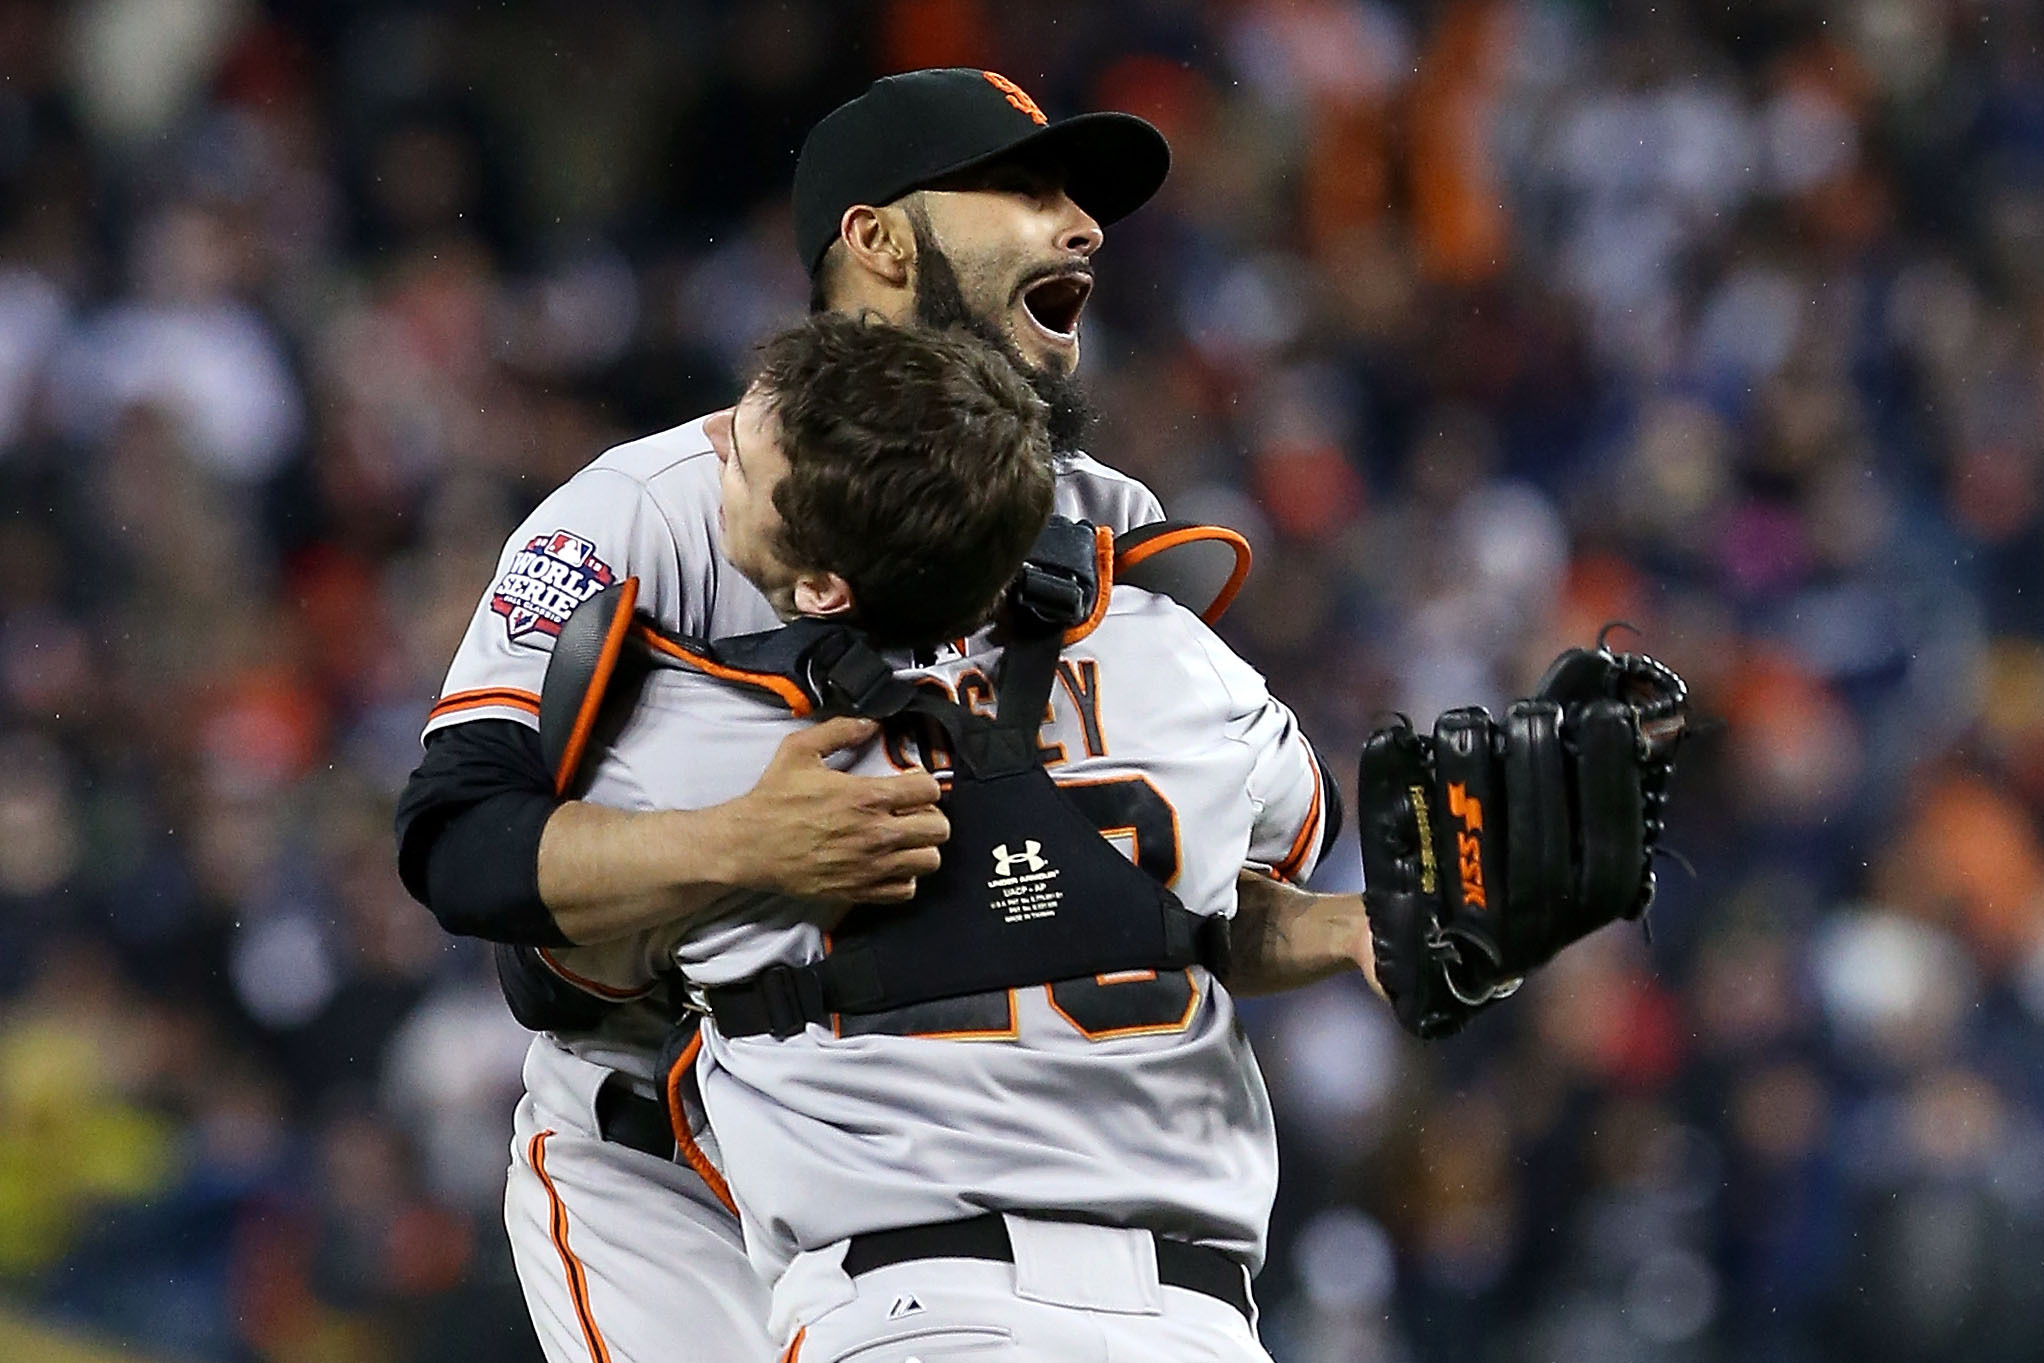 The Giants Win the 2012 World Series – The Trophy Returns to San